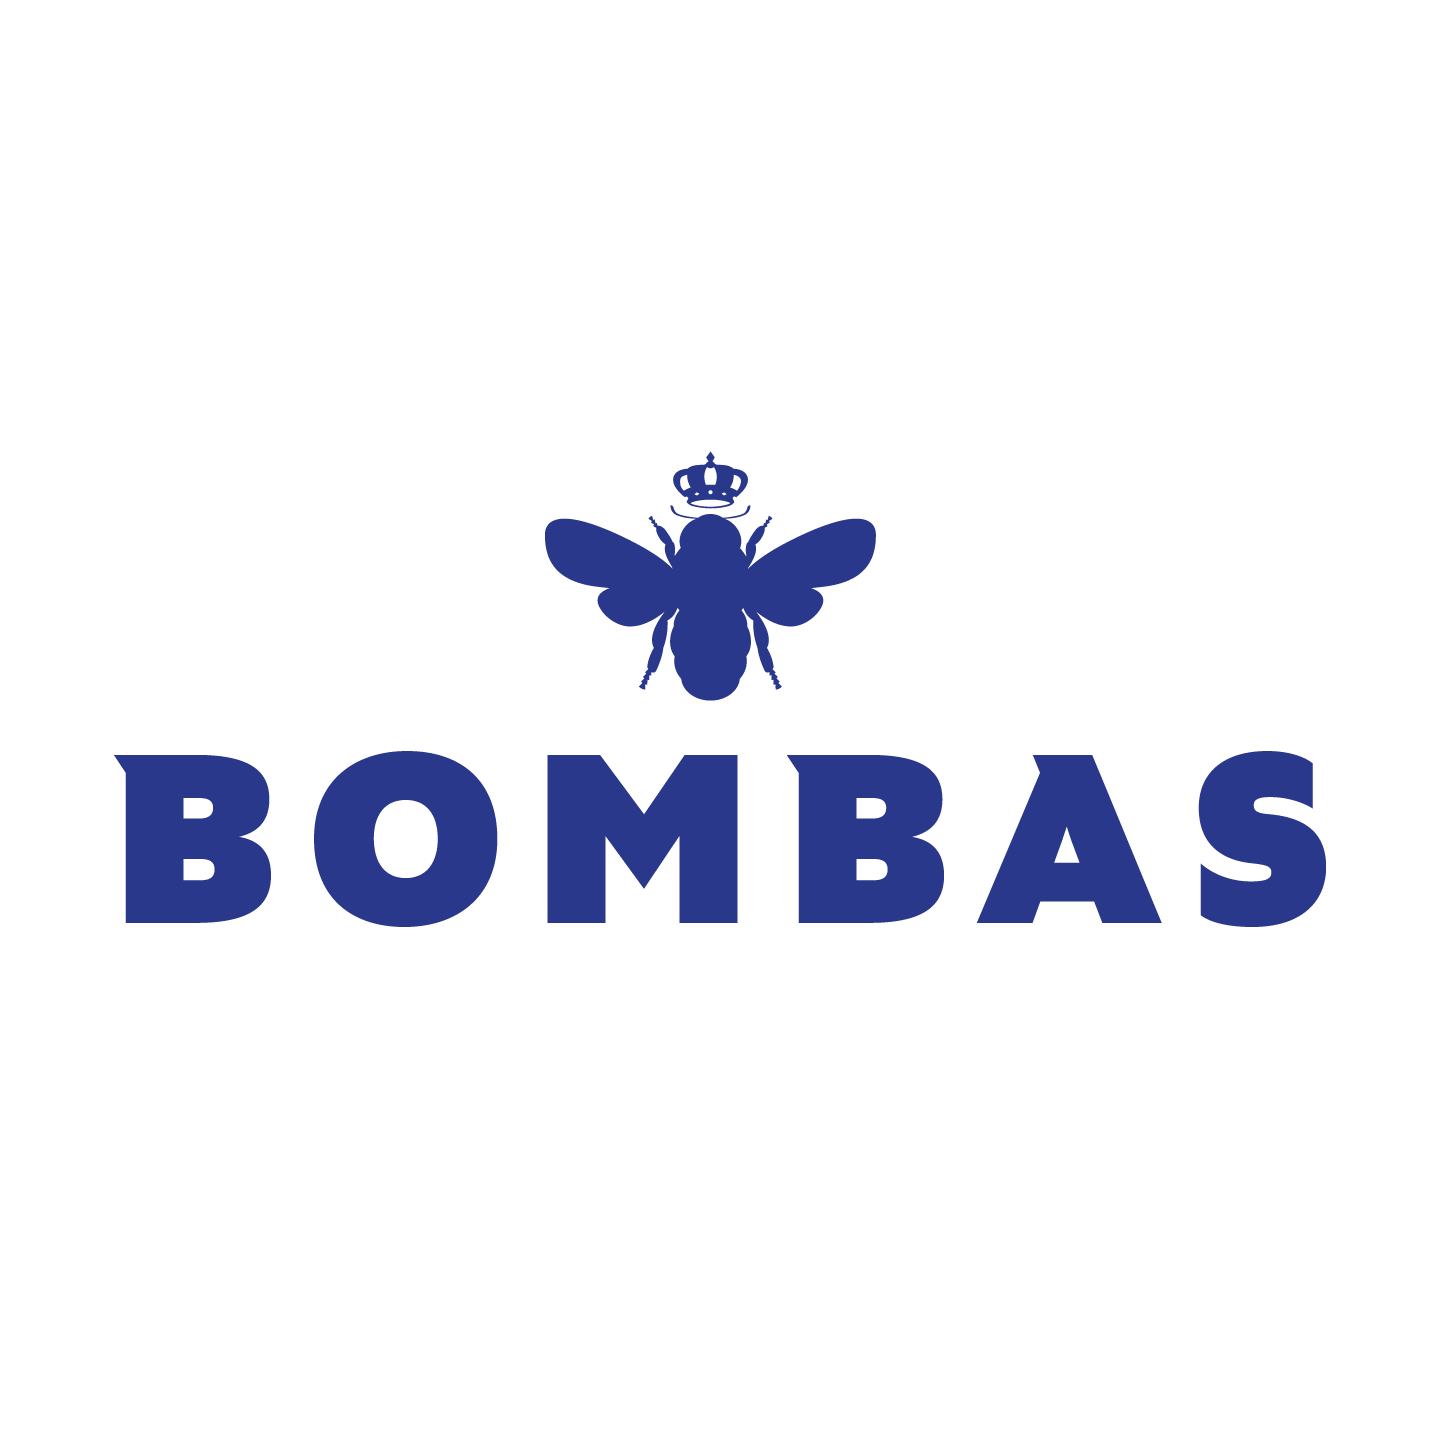 Bombas_1559934407.png